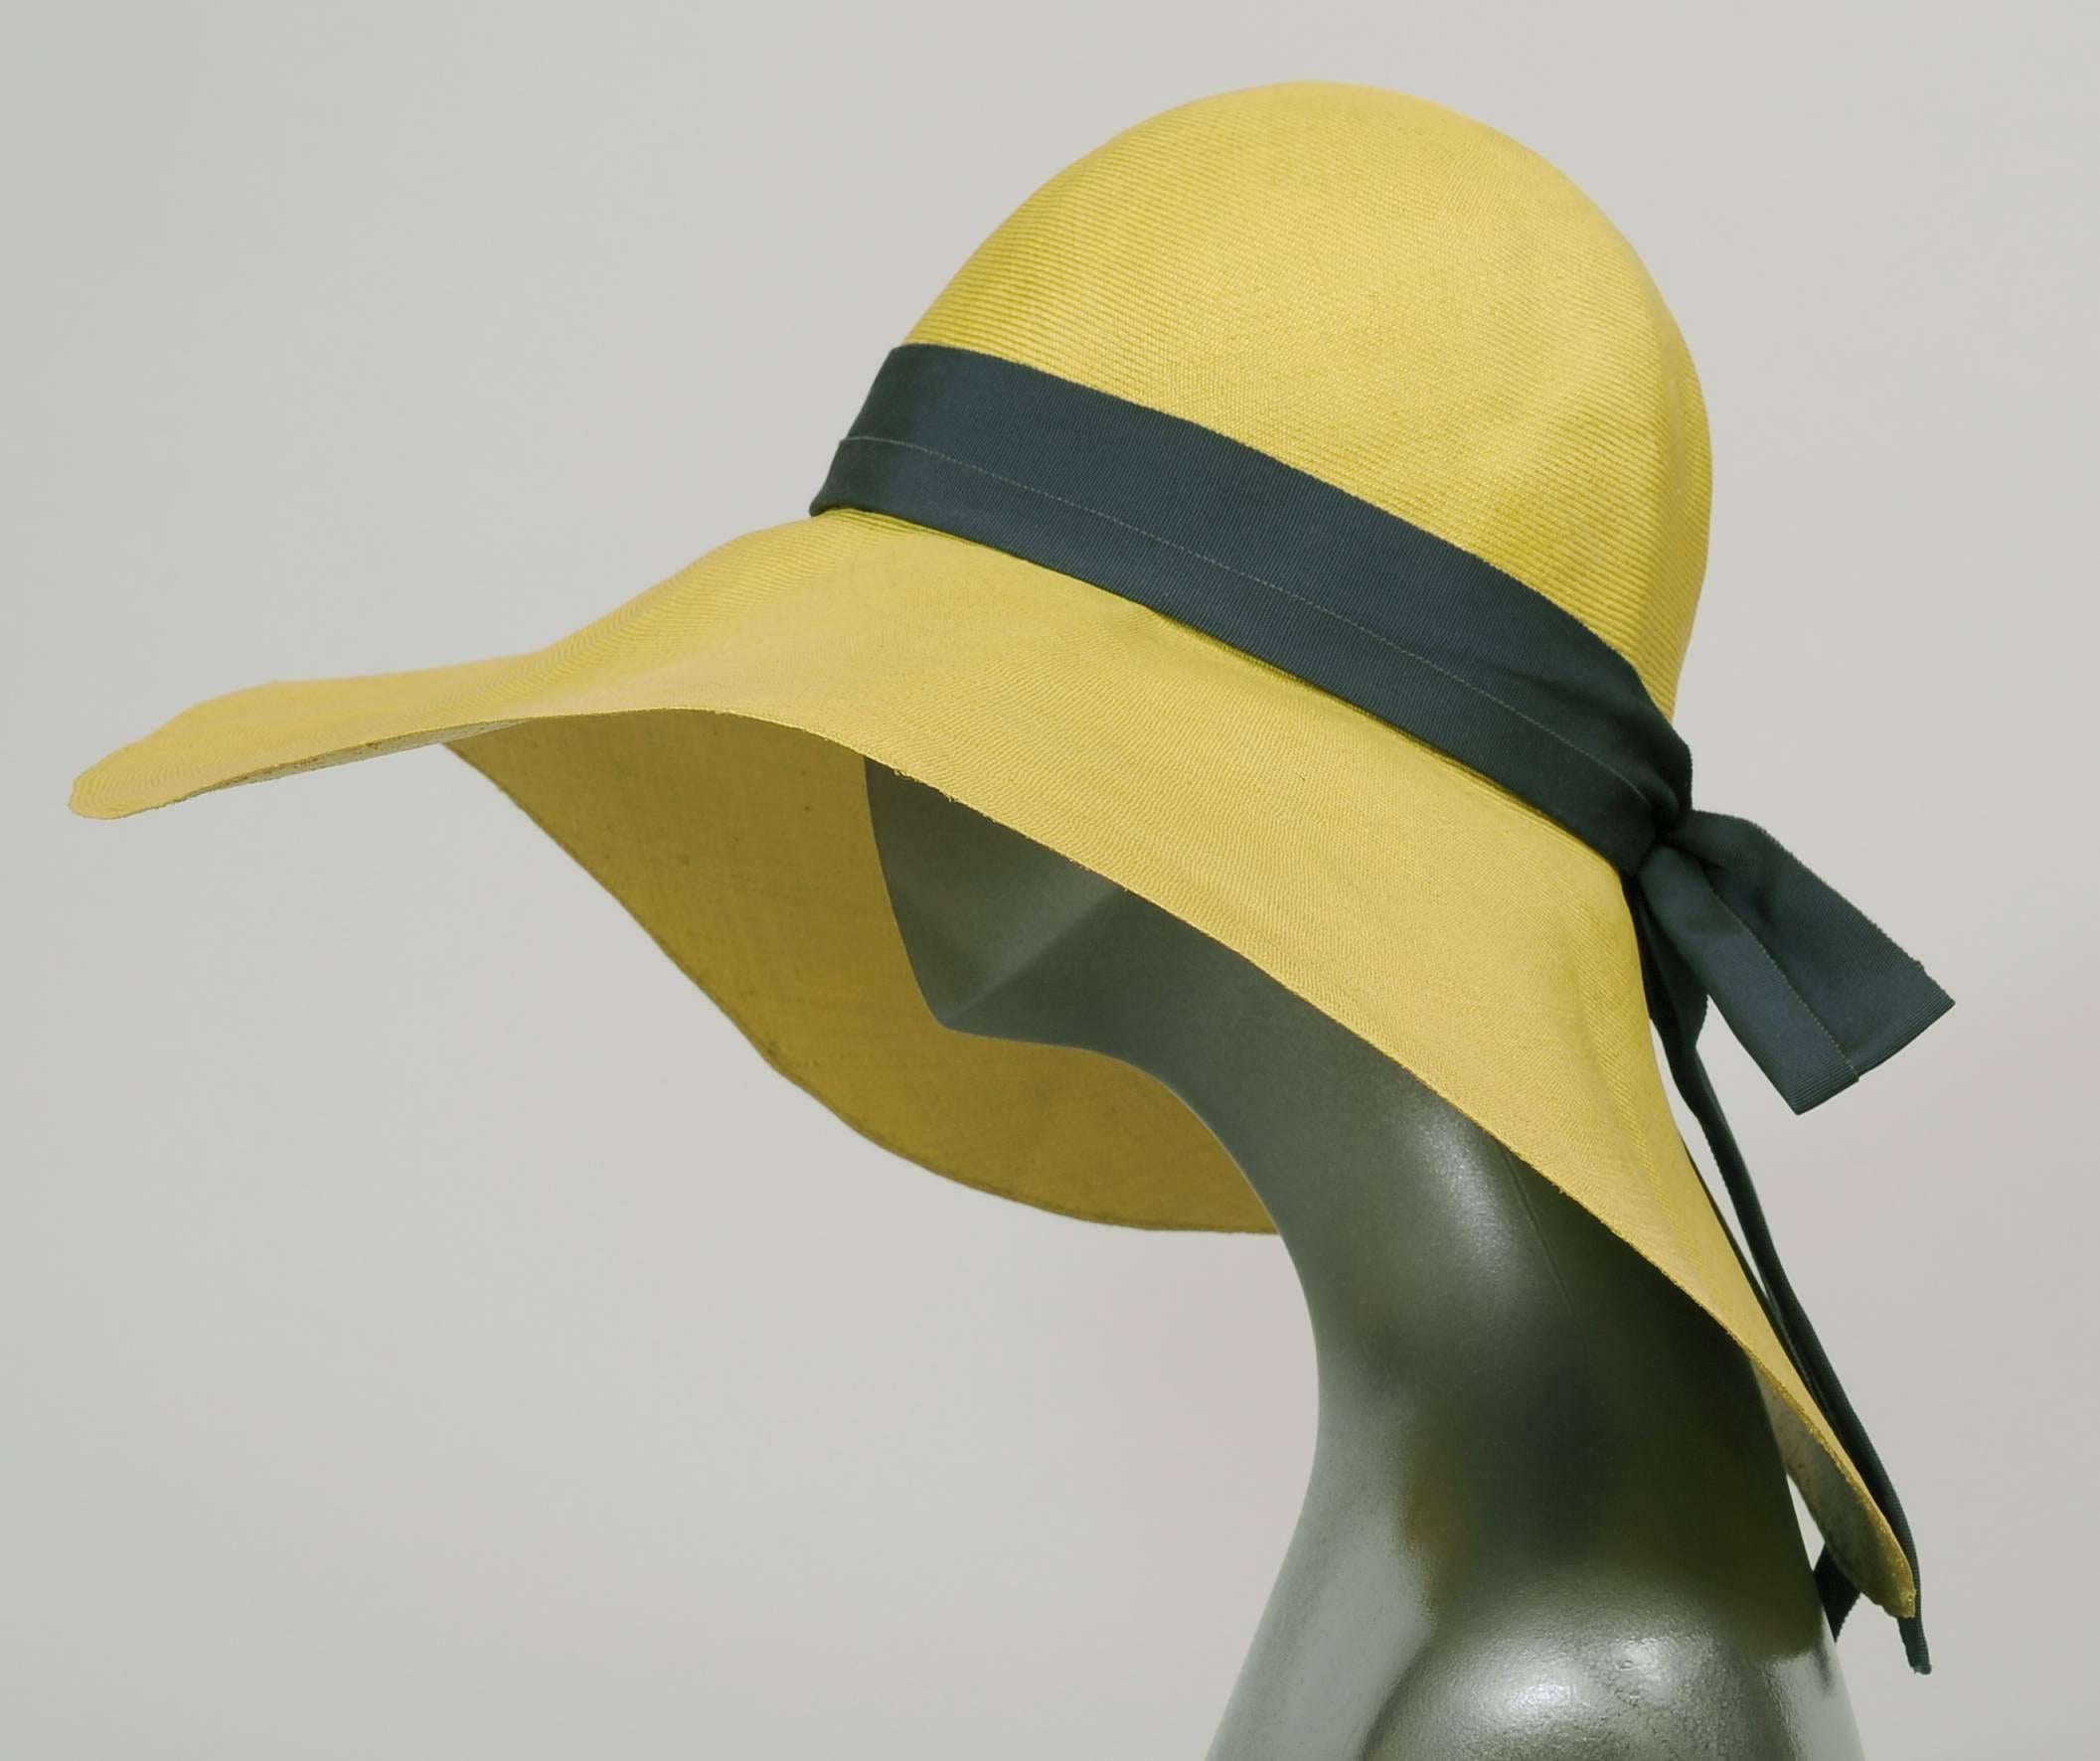 A broad floppy brim adds glamour and mystery to the wearer of this finely woven chartreuse straw hat designed by Adolfo. The crown is trimmed with a navy blue gros grain ribbon hat band. This hat is in excellent condition.
Measurements;
Interior